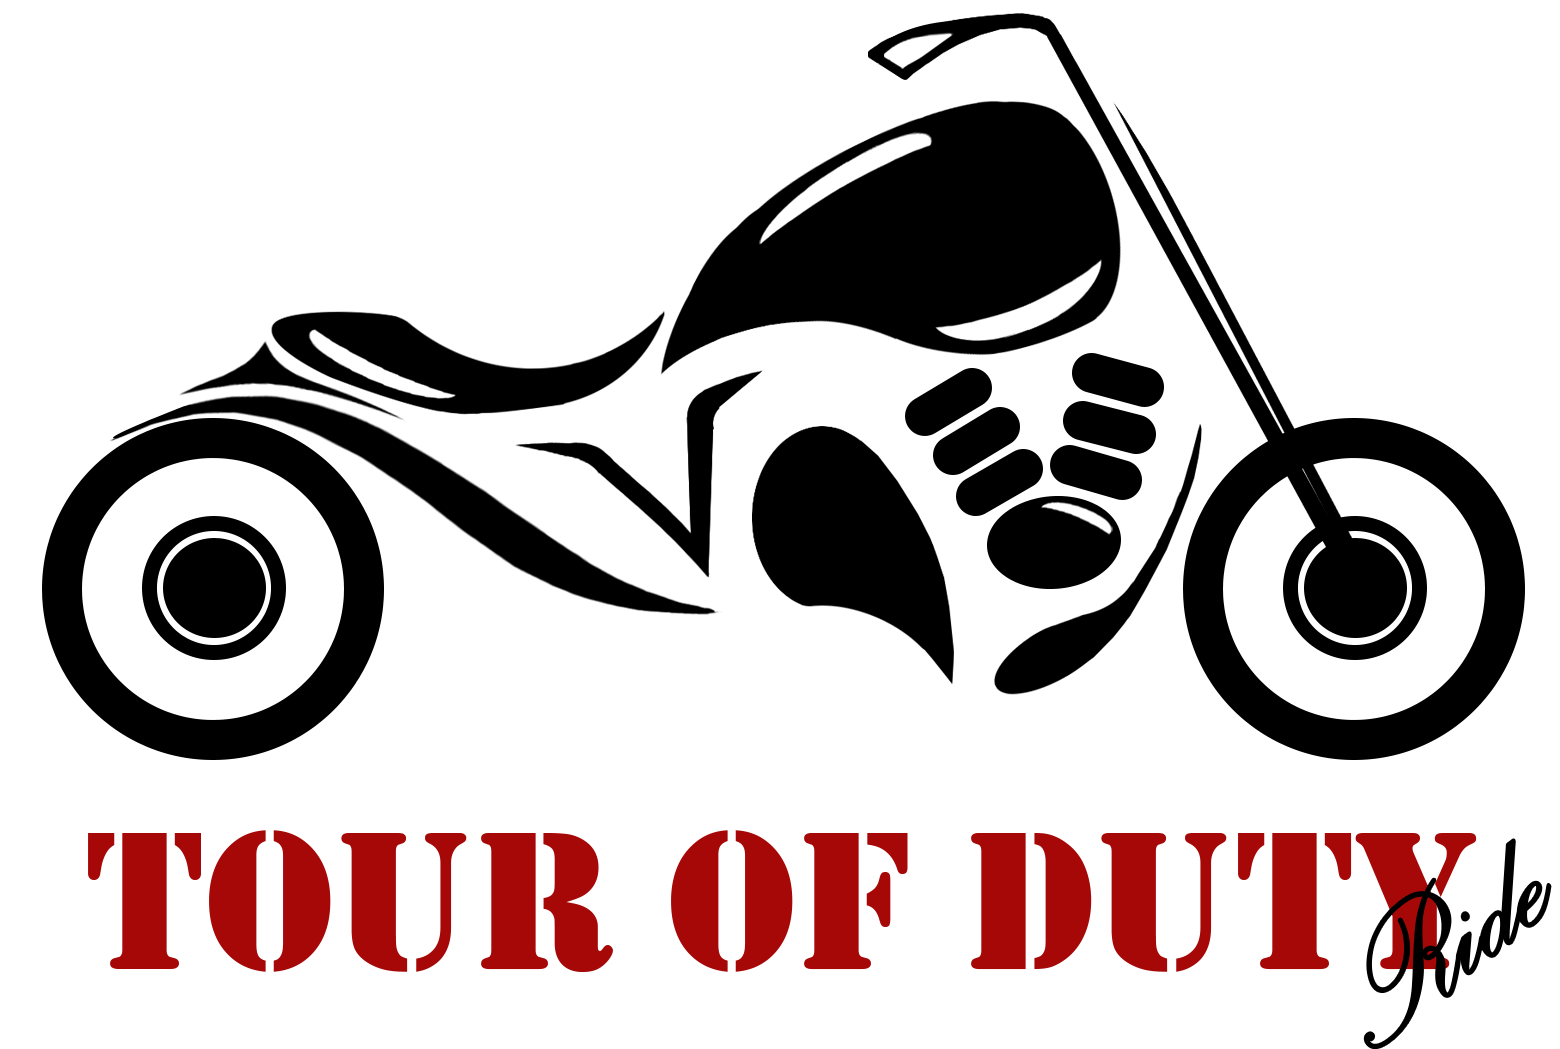 Ride Logo - Tour of Duty - Military Assistance Mission